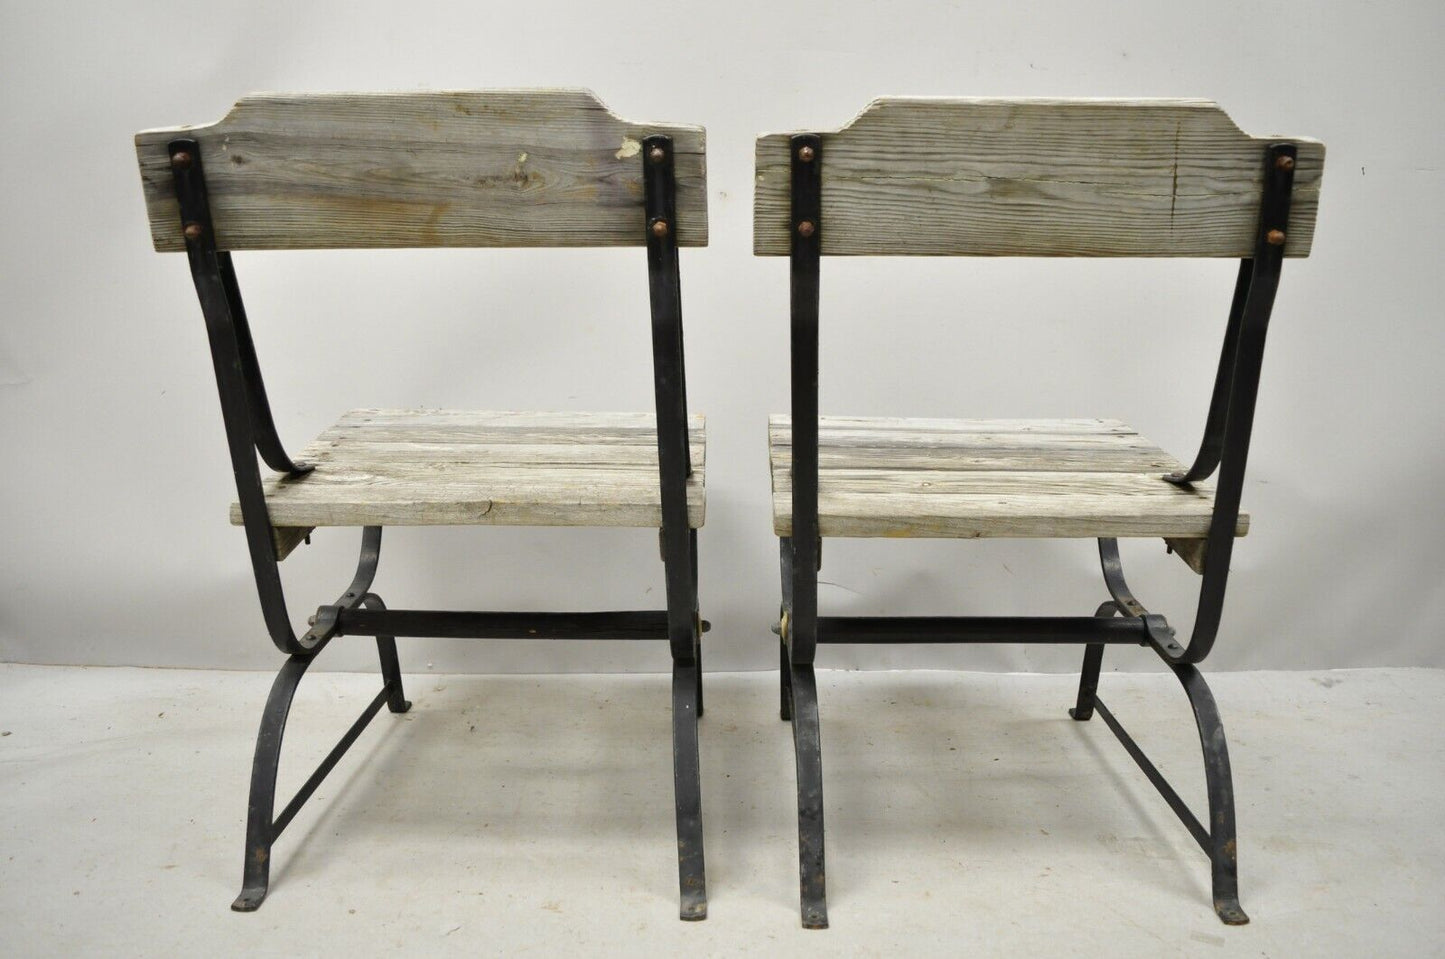 Antique French Industrial Wrought Iron Wooden Slat Seat Side Chairs - a Pair